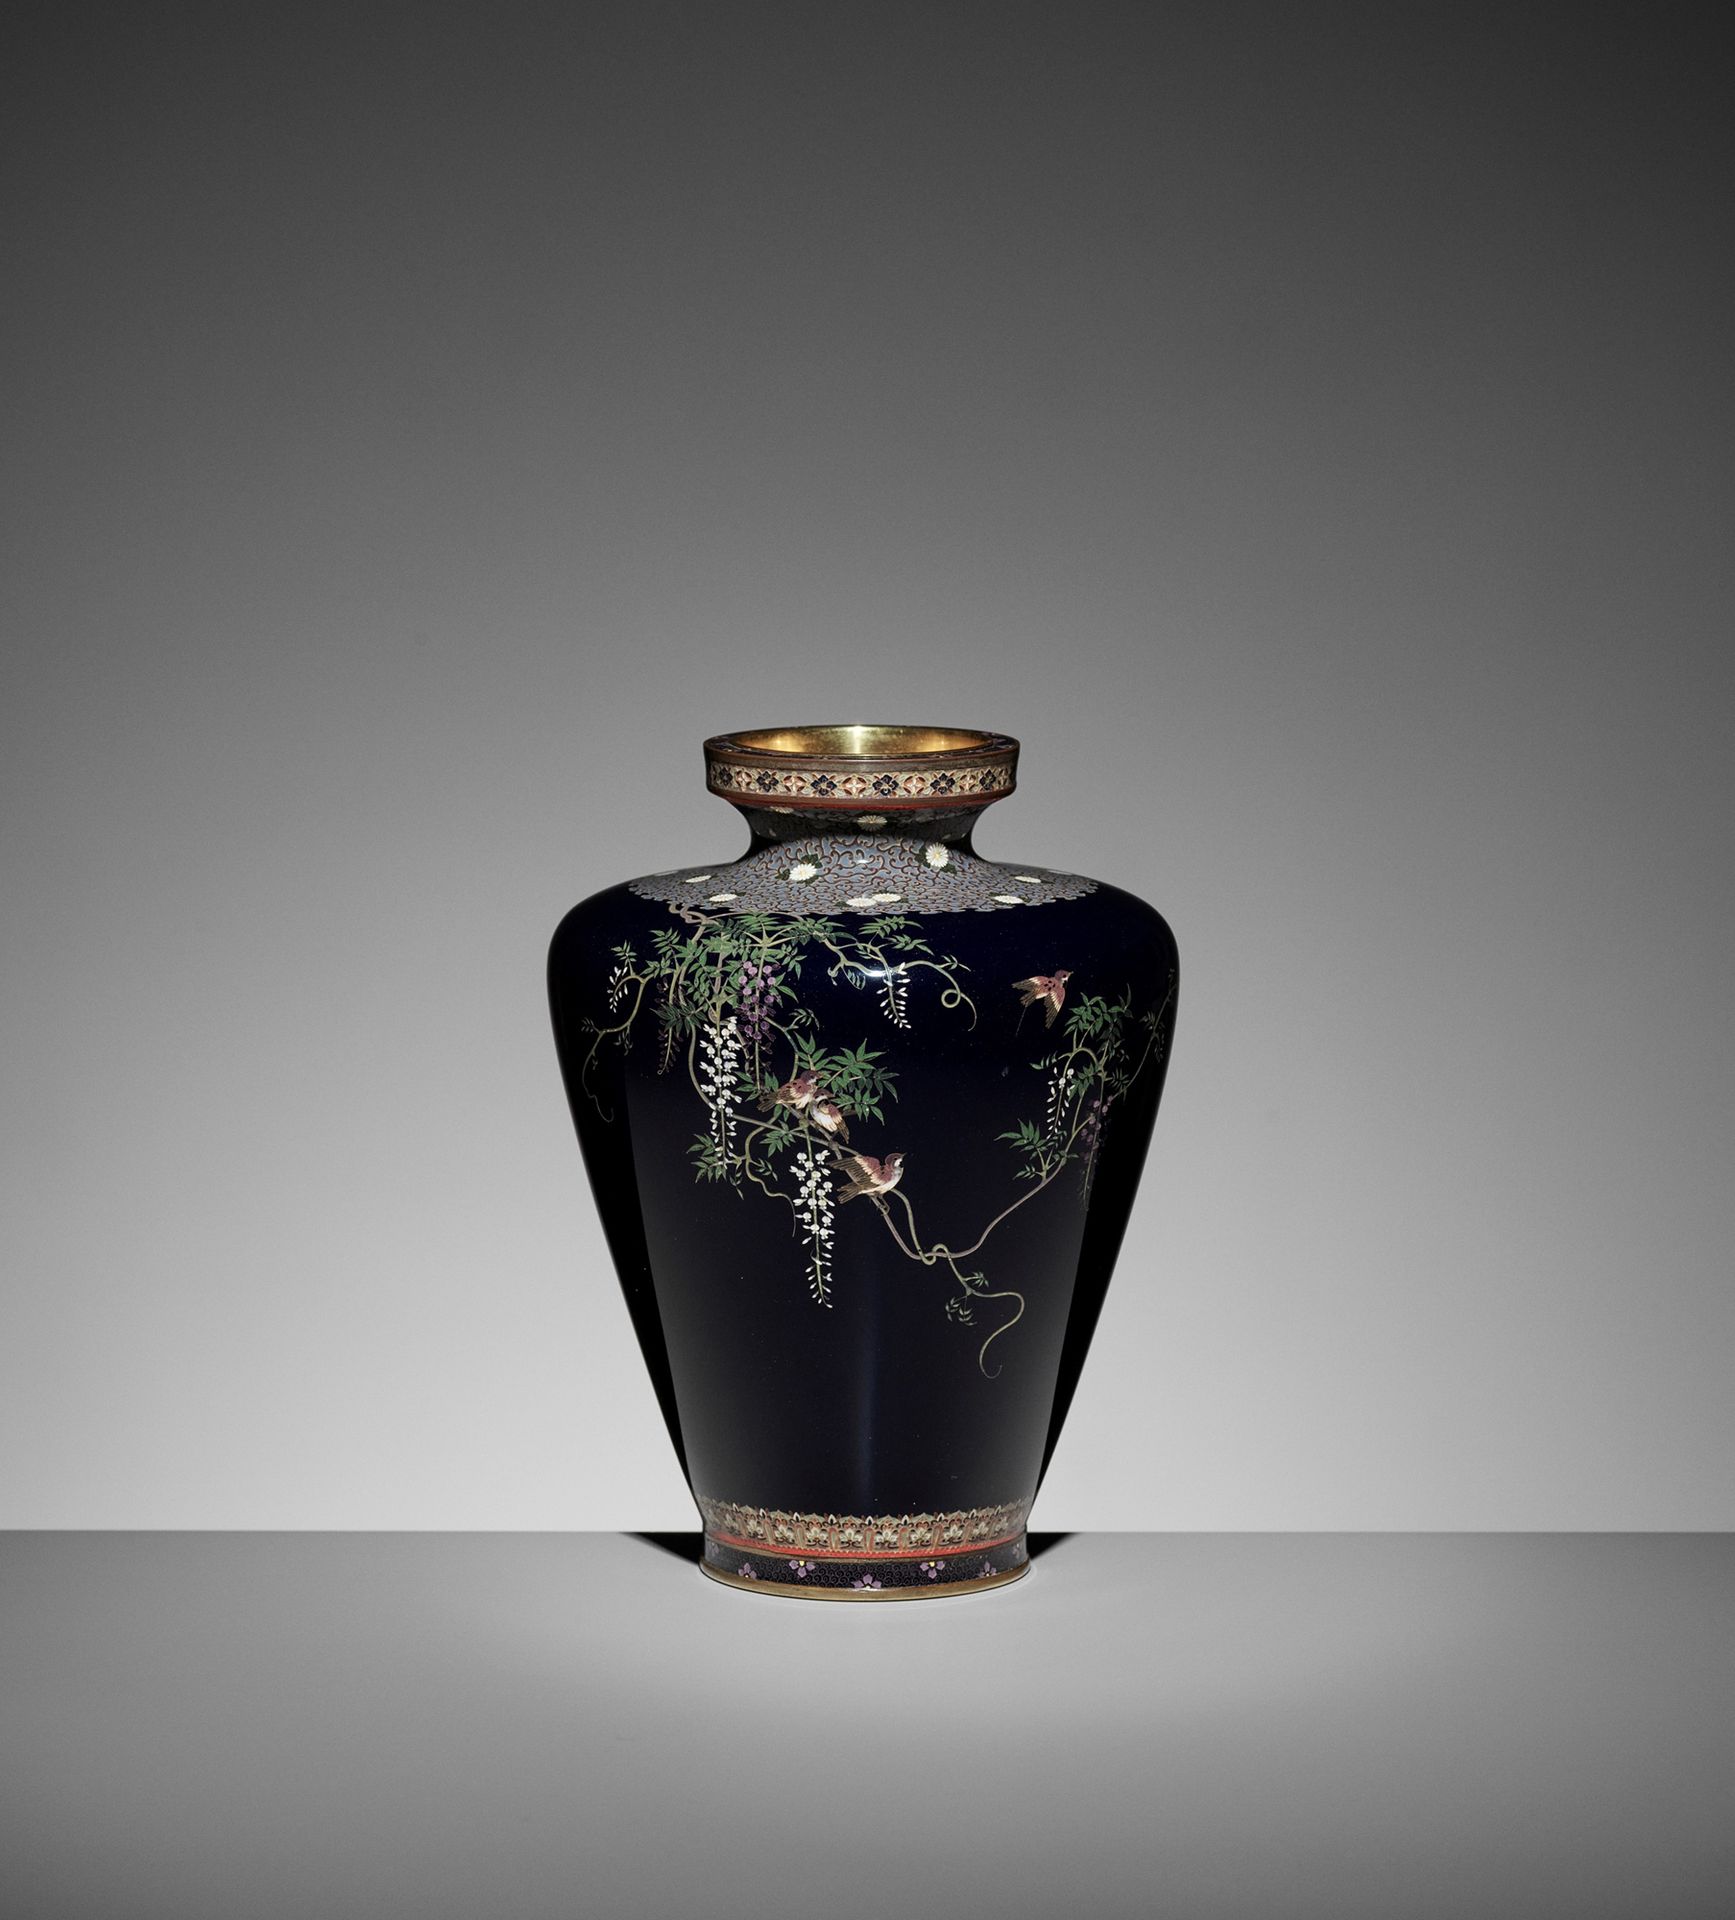 A FINE CLOISONNÉ ENAMEL VASE WITH SPARROWS AND WISTERIA, ATTRIBUTED TO THE WORKS&hellip;